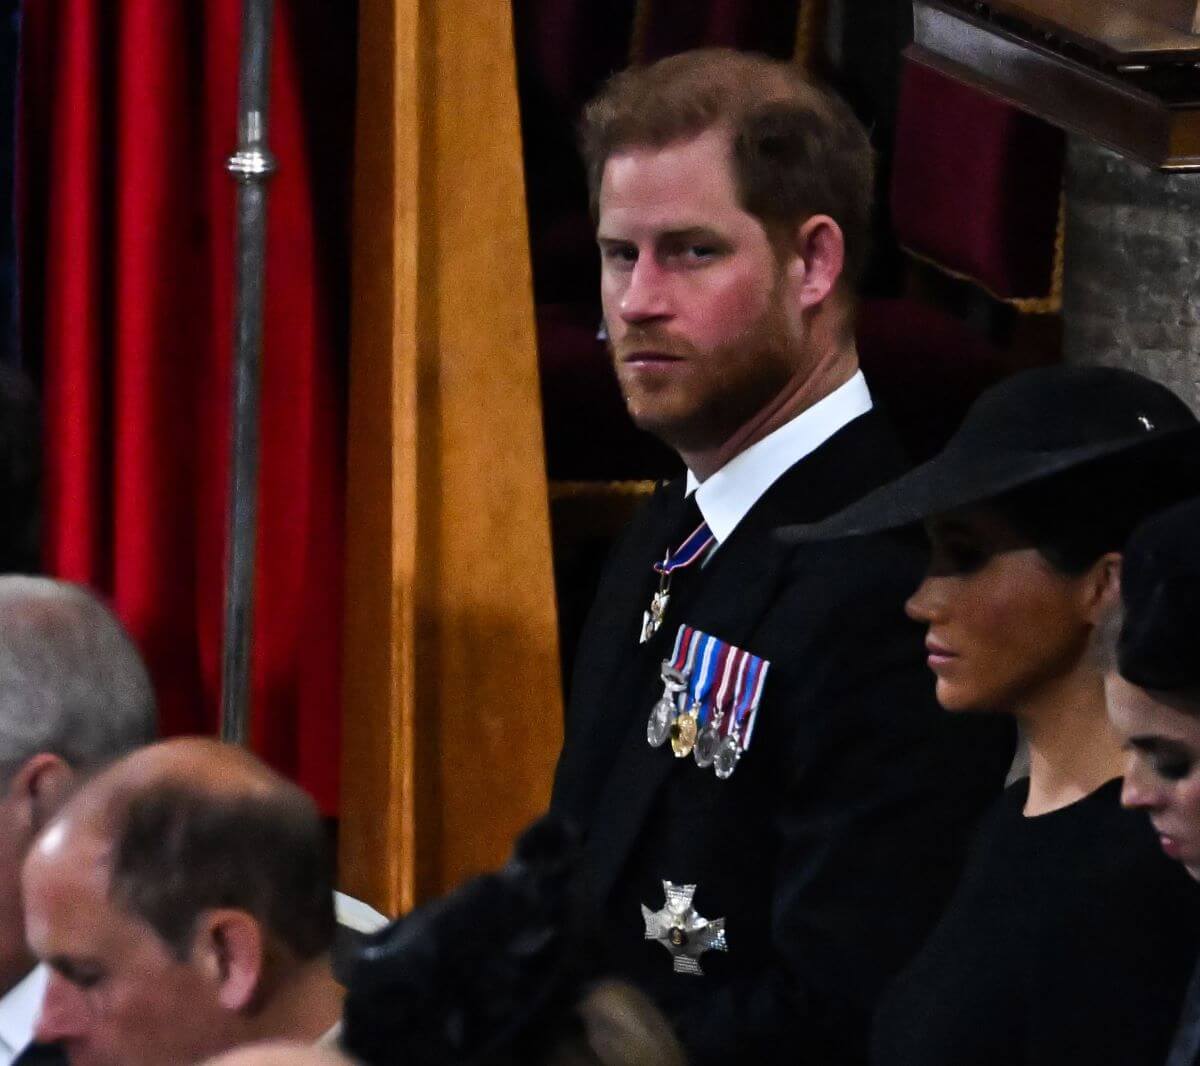 Prince Harry and Meghan Markle attend the State Funeral of Queen Elizabeth II at Westminster Abbey